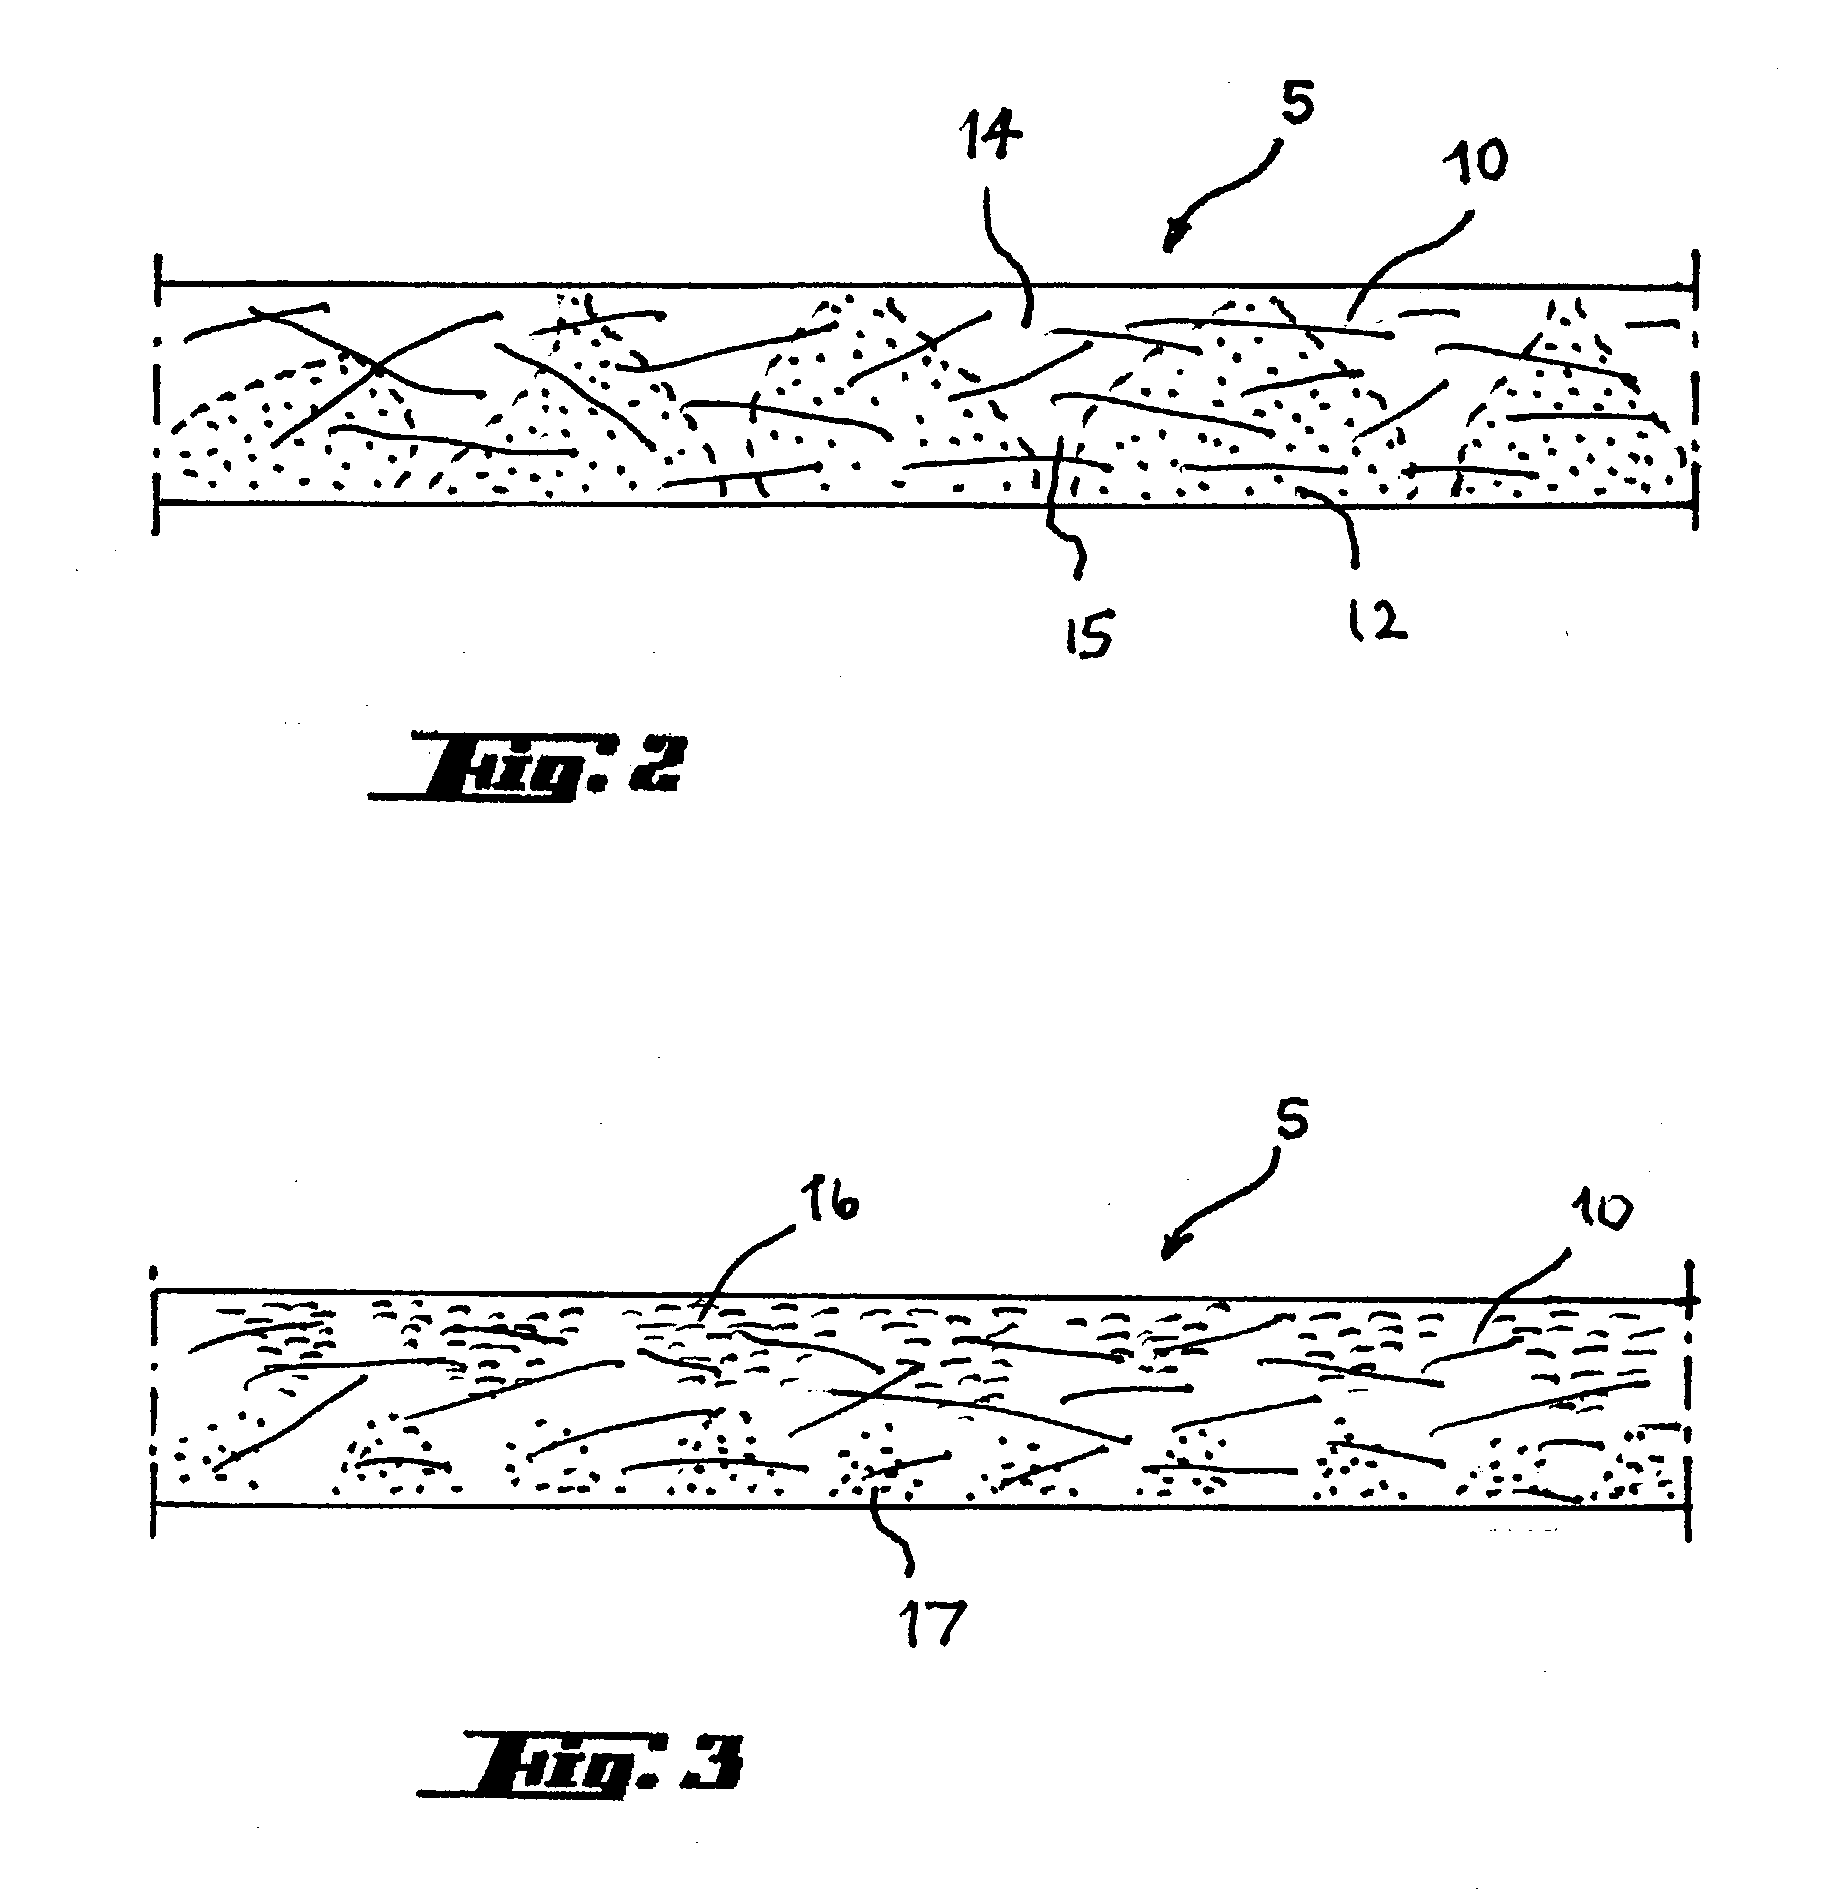 Carbon fiber electrode substrate for electrochemical cells